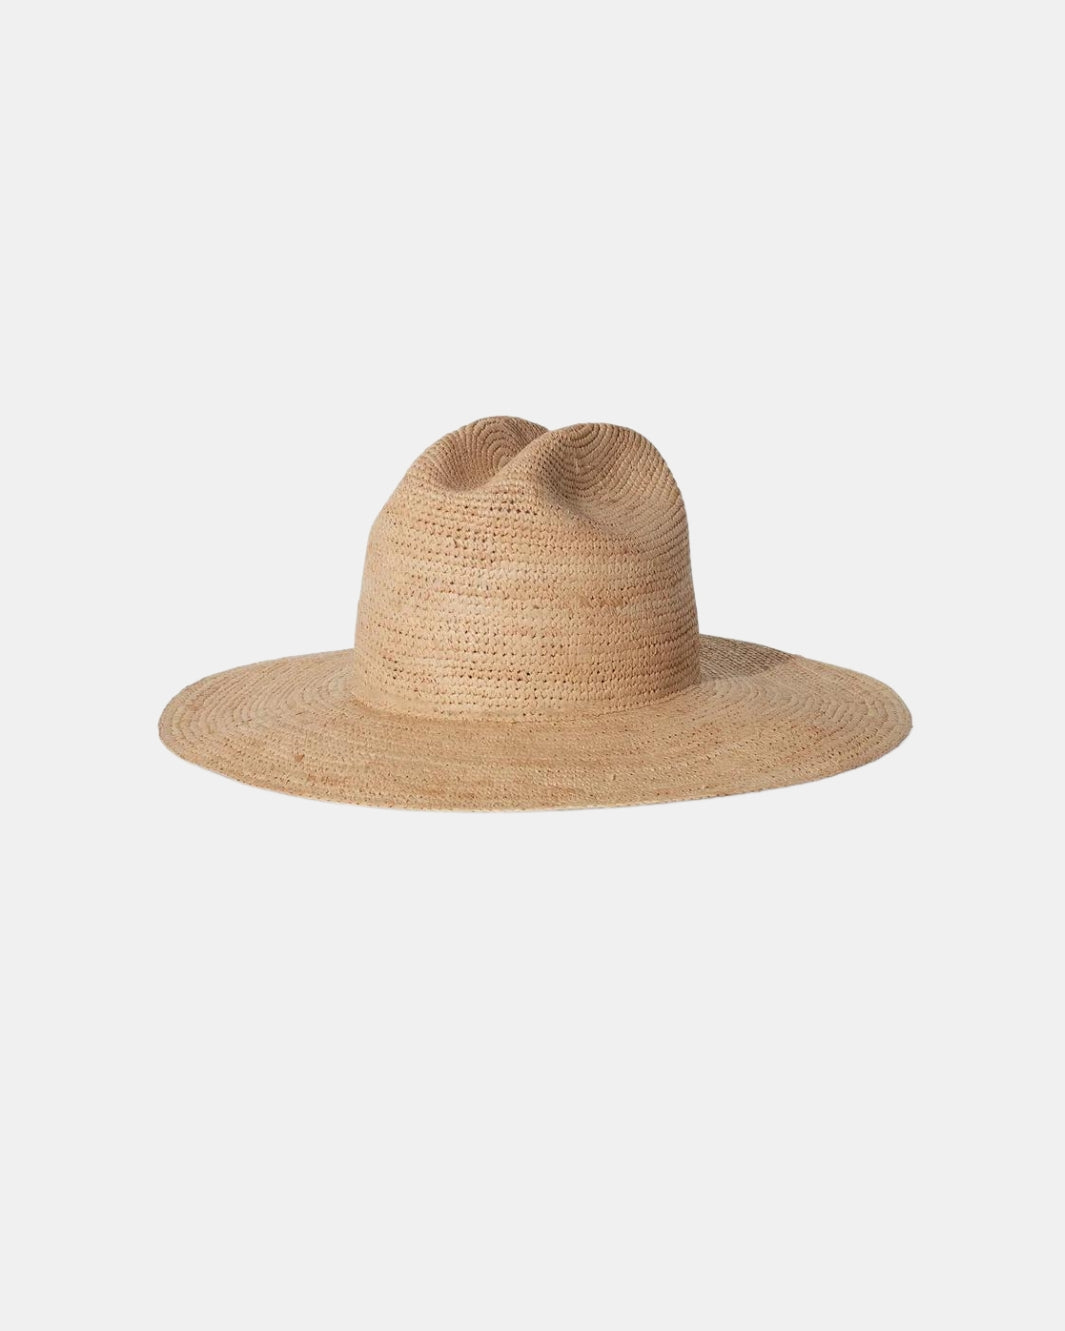 CHANDLER HAT IN NATURAL - Romi Boutique